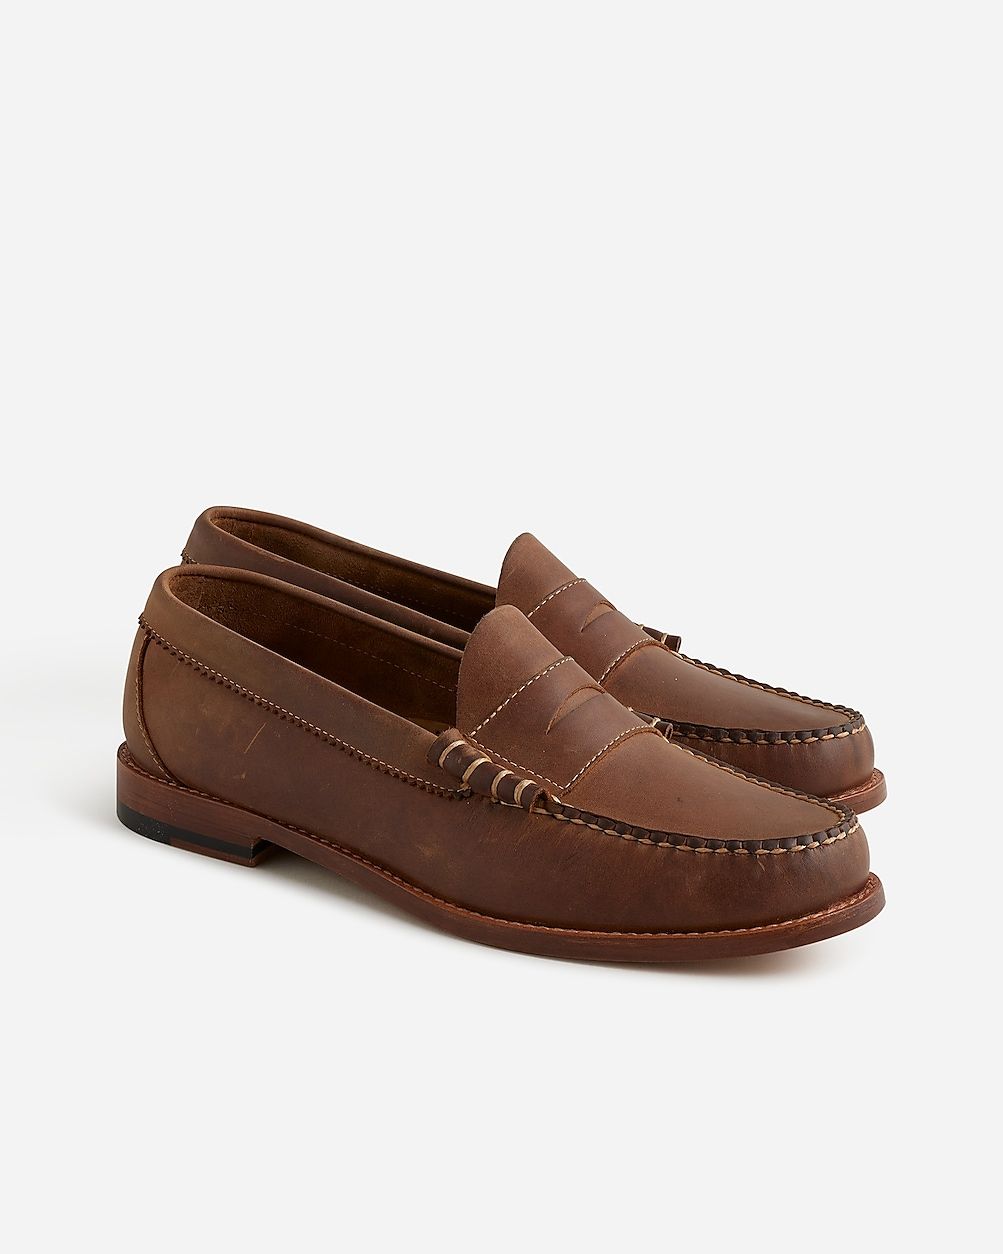 Camden loafers with leather soles | J.Crew US